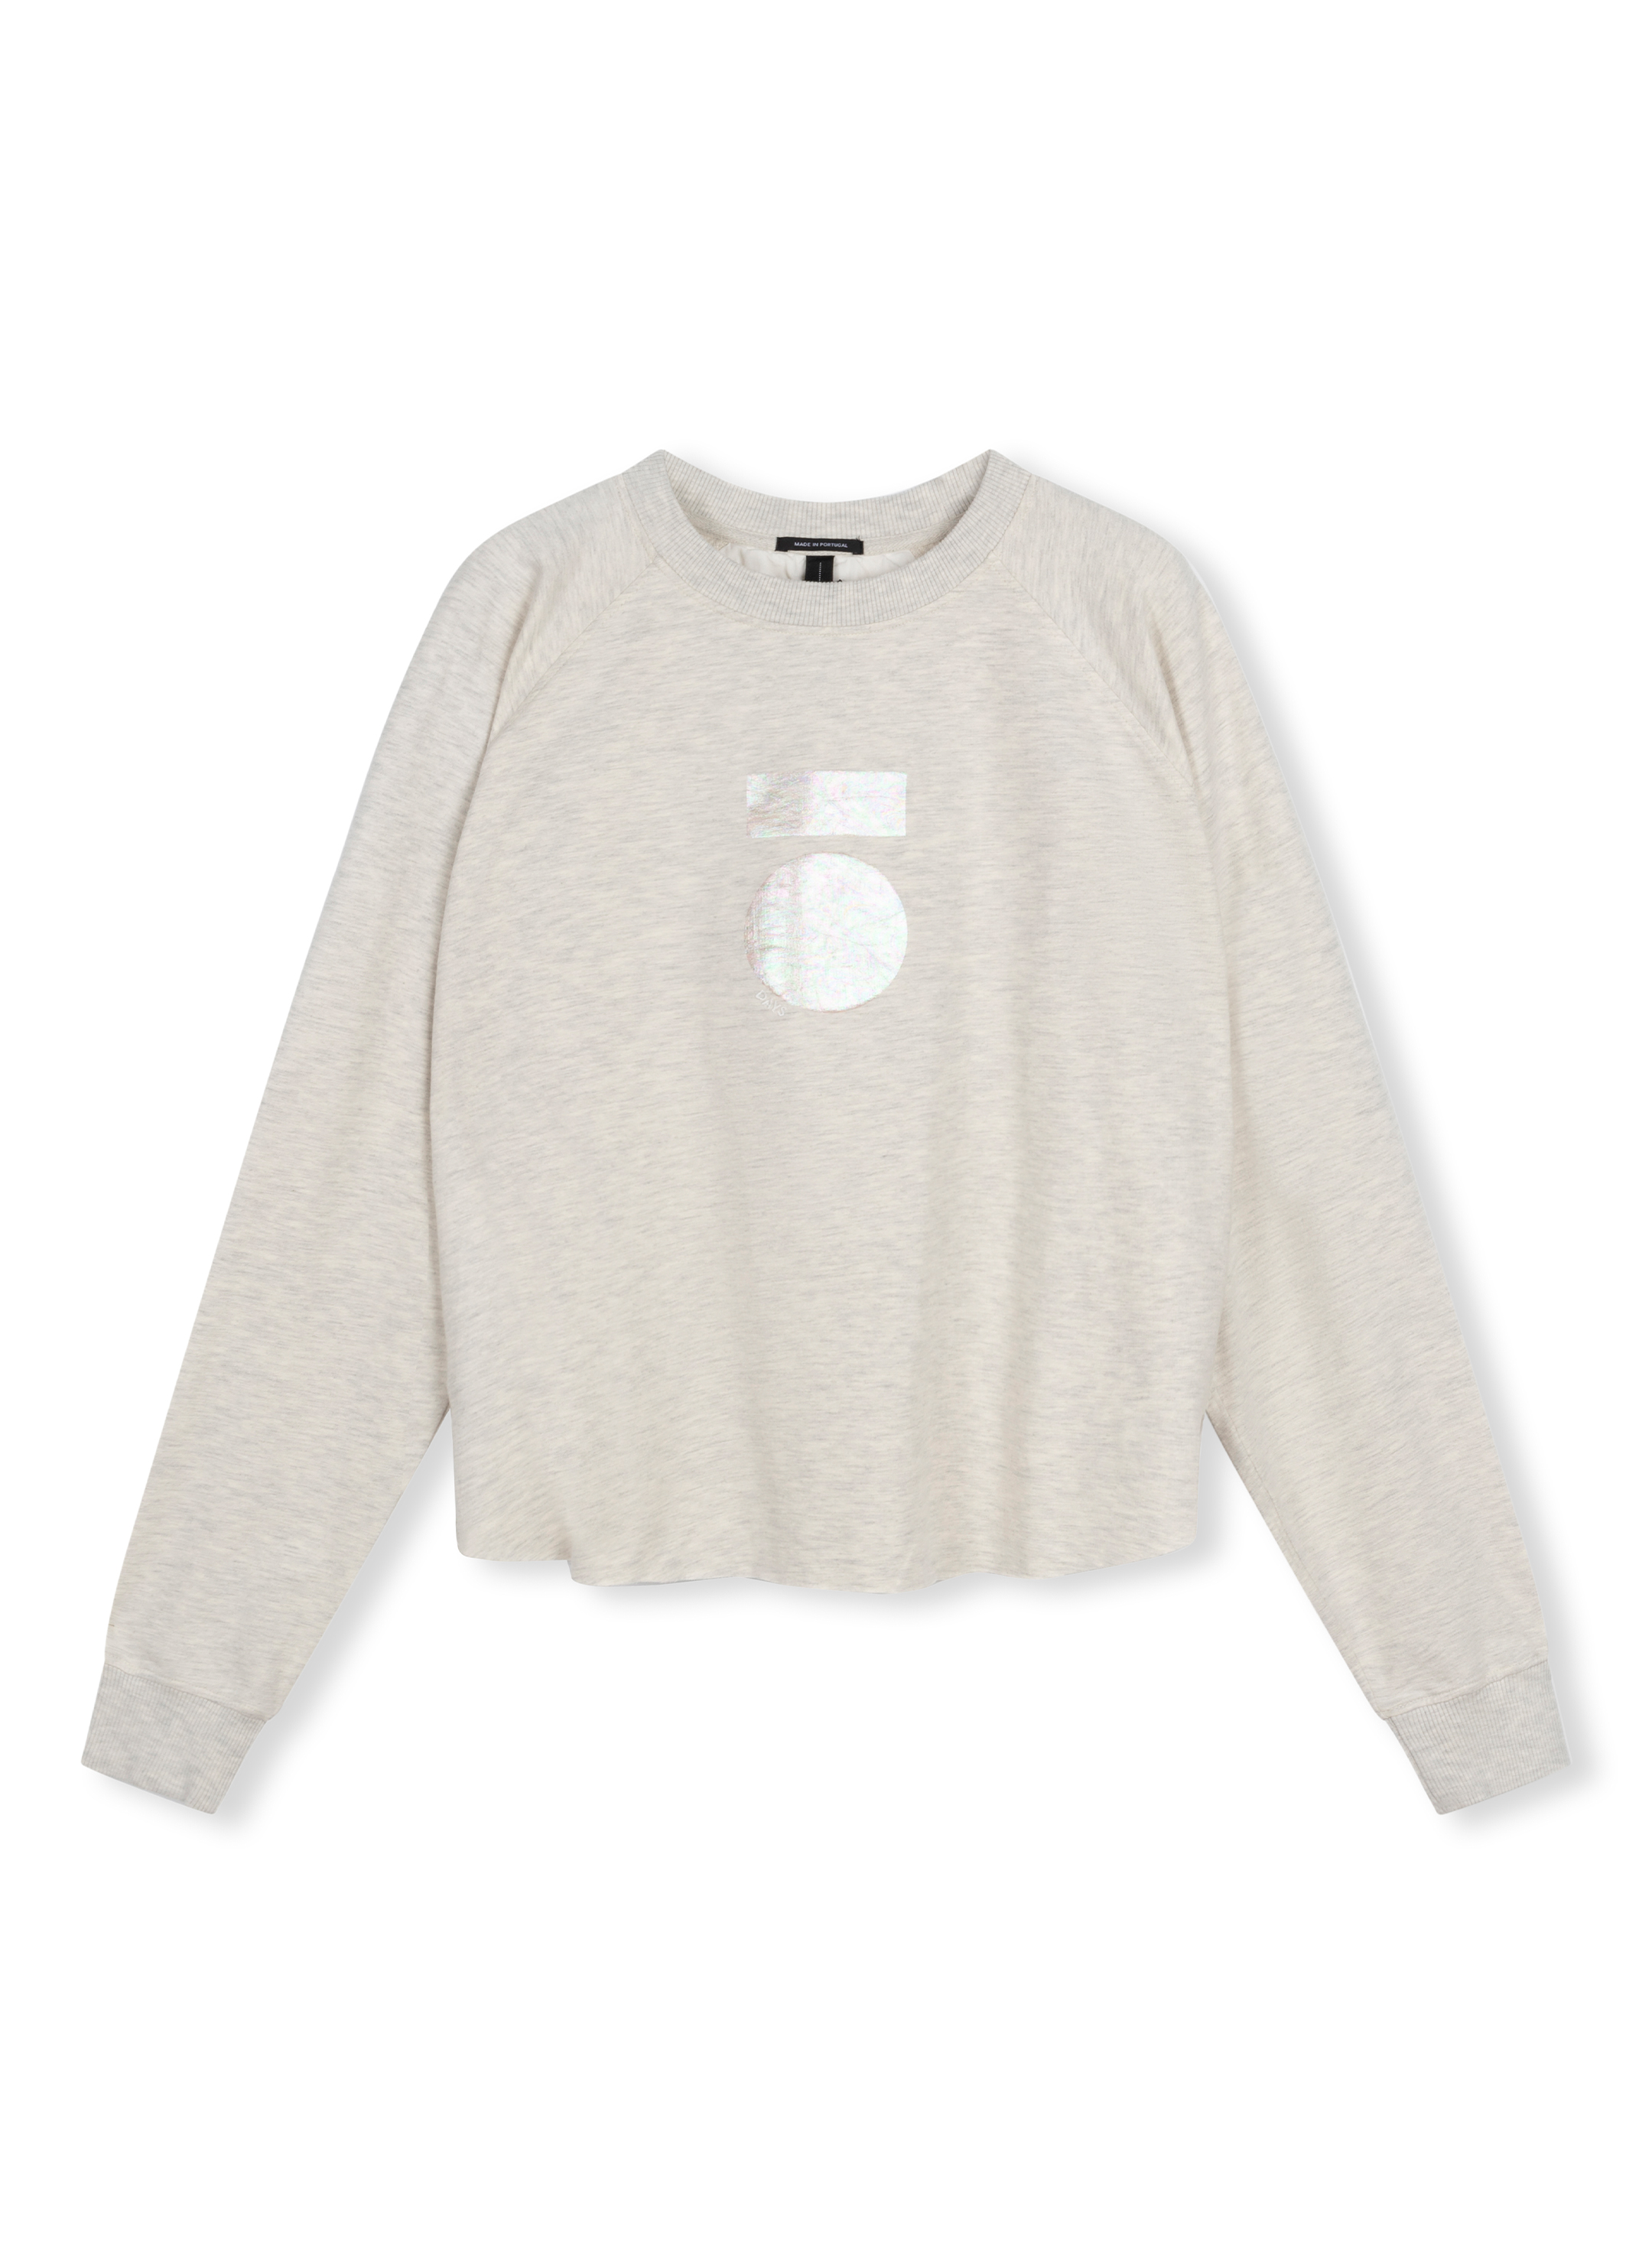 10Days cropped icon sweater soft white melee